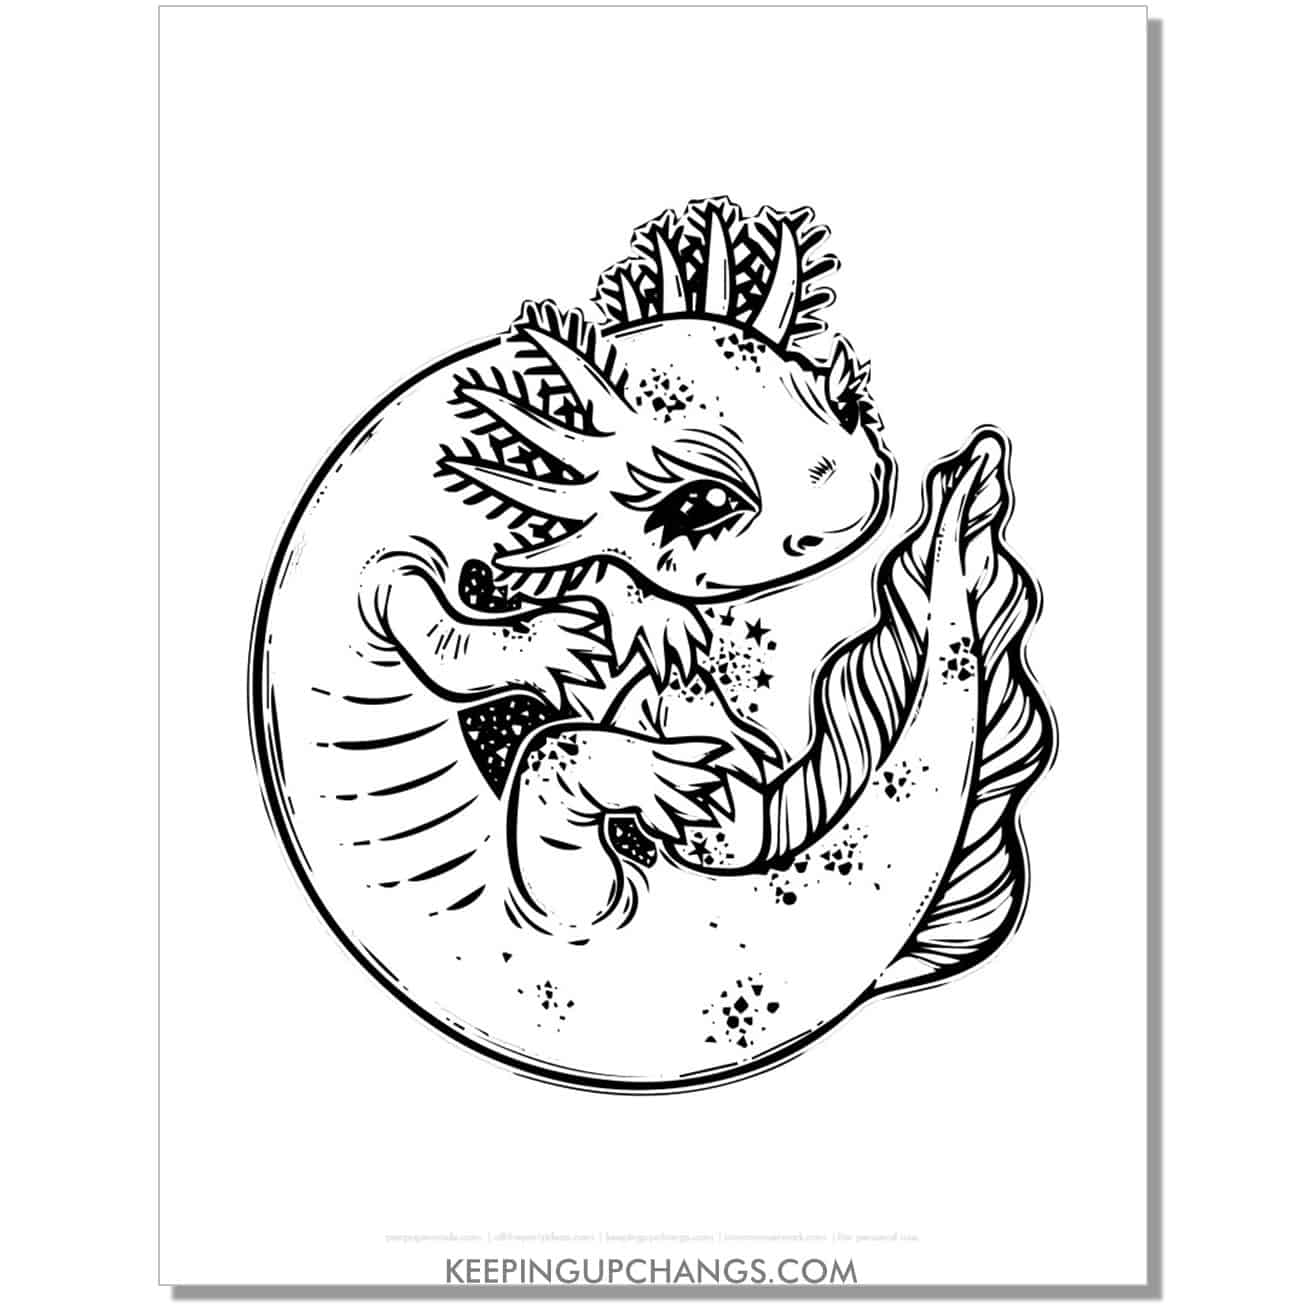 free realistic baby axolotl coloring page, colouring sheet curled in fetal position.